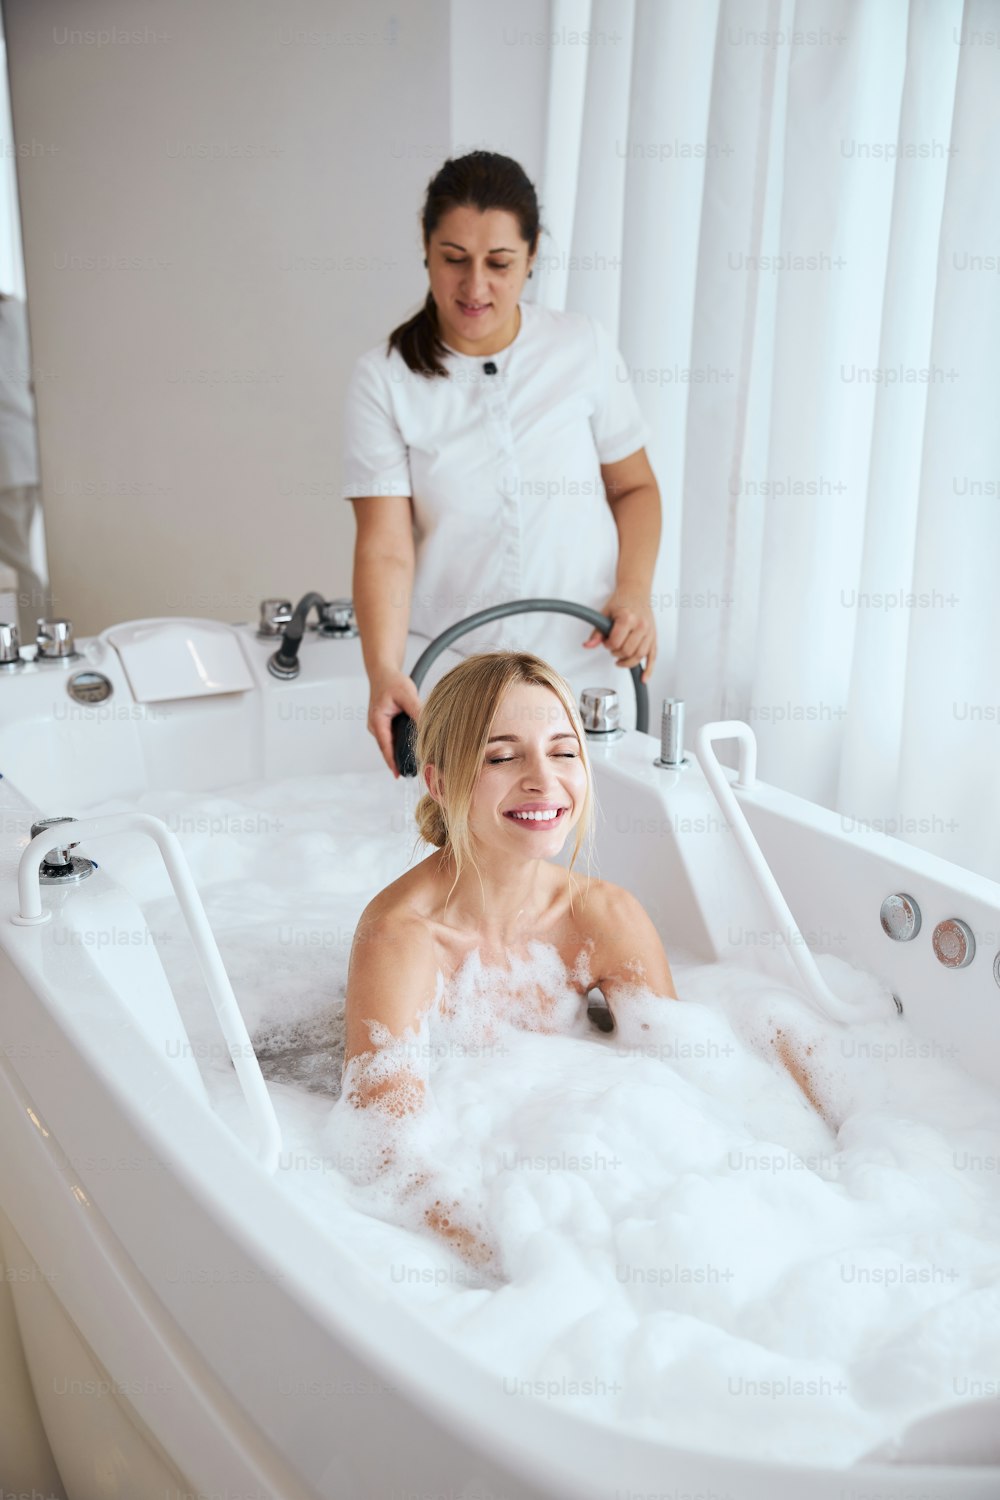 Waist up portrait of female enjoying in the hydro massage bathtub and professional spa salon worker using a hose during the underwater massage